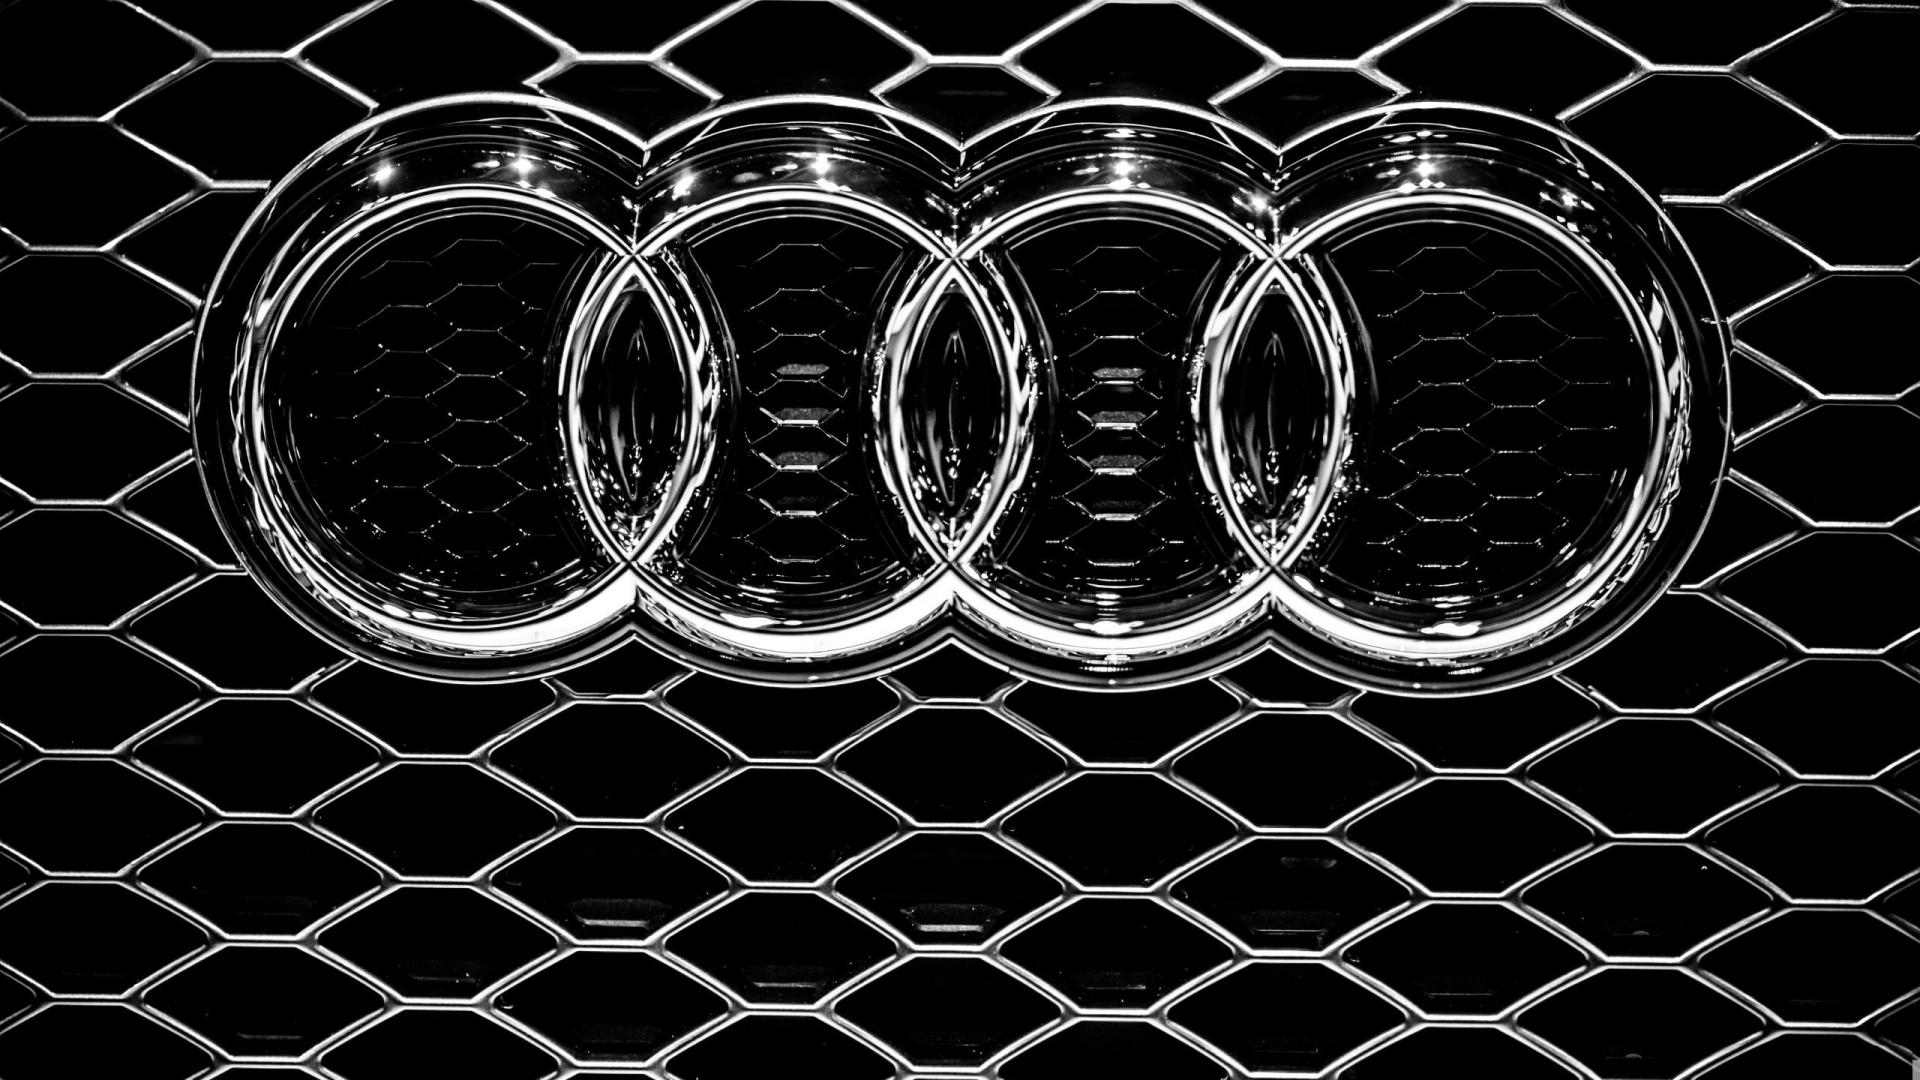 Audi Grille for 1920 x 1080 HDTV 1080p resolution